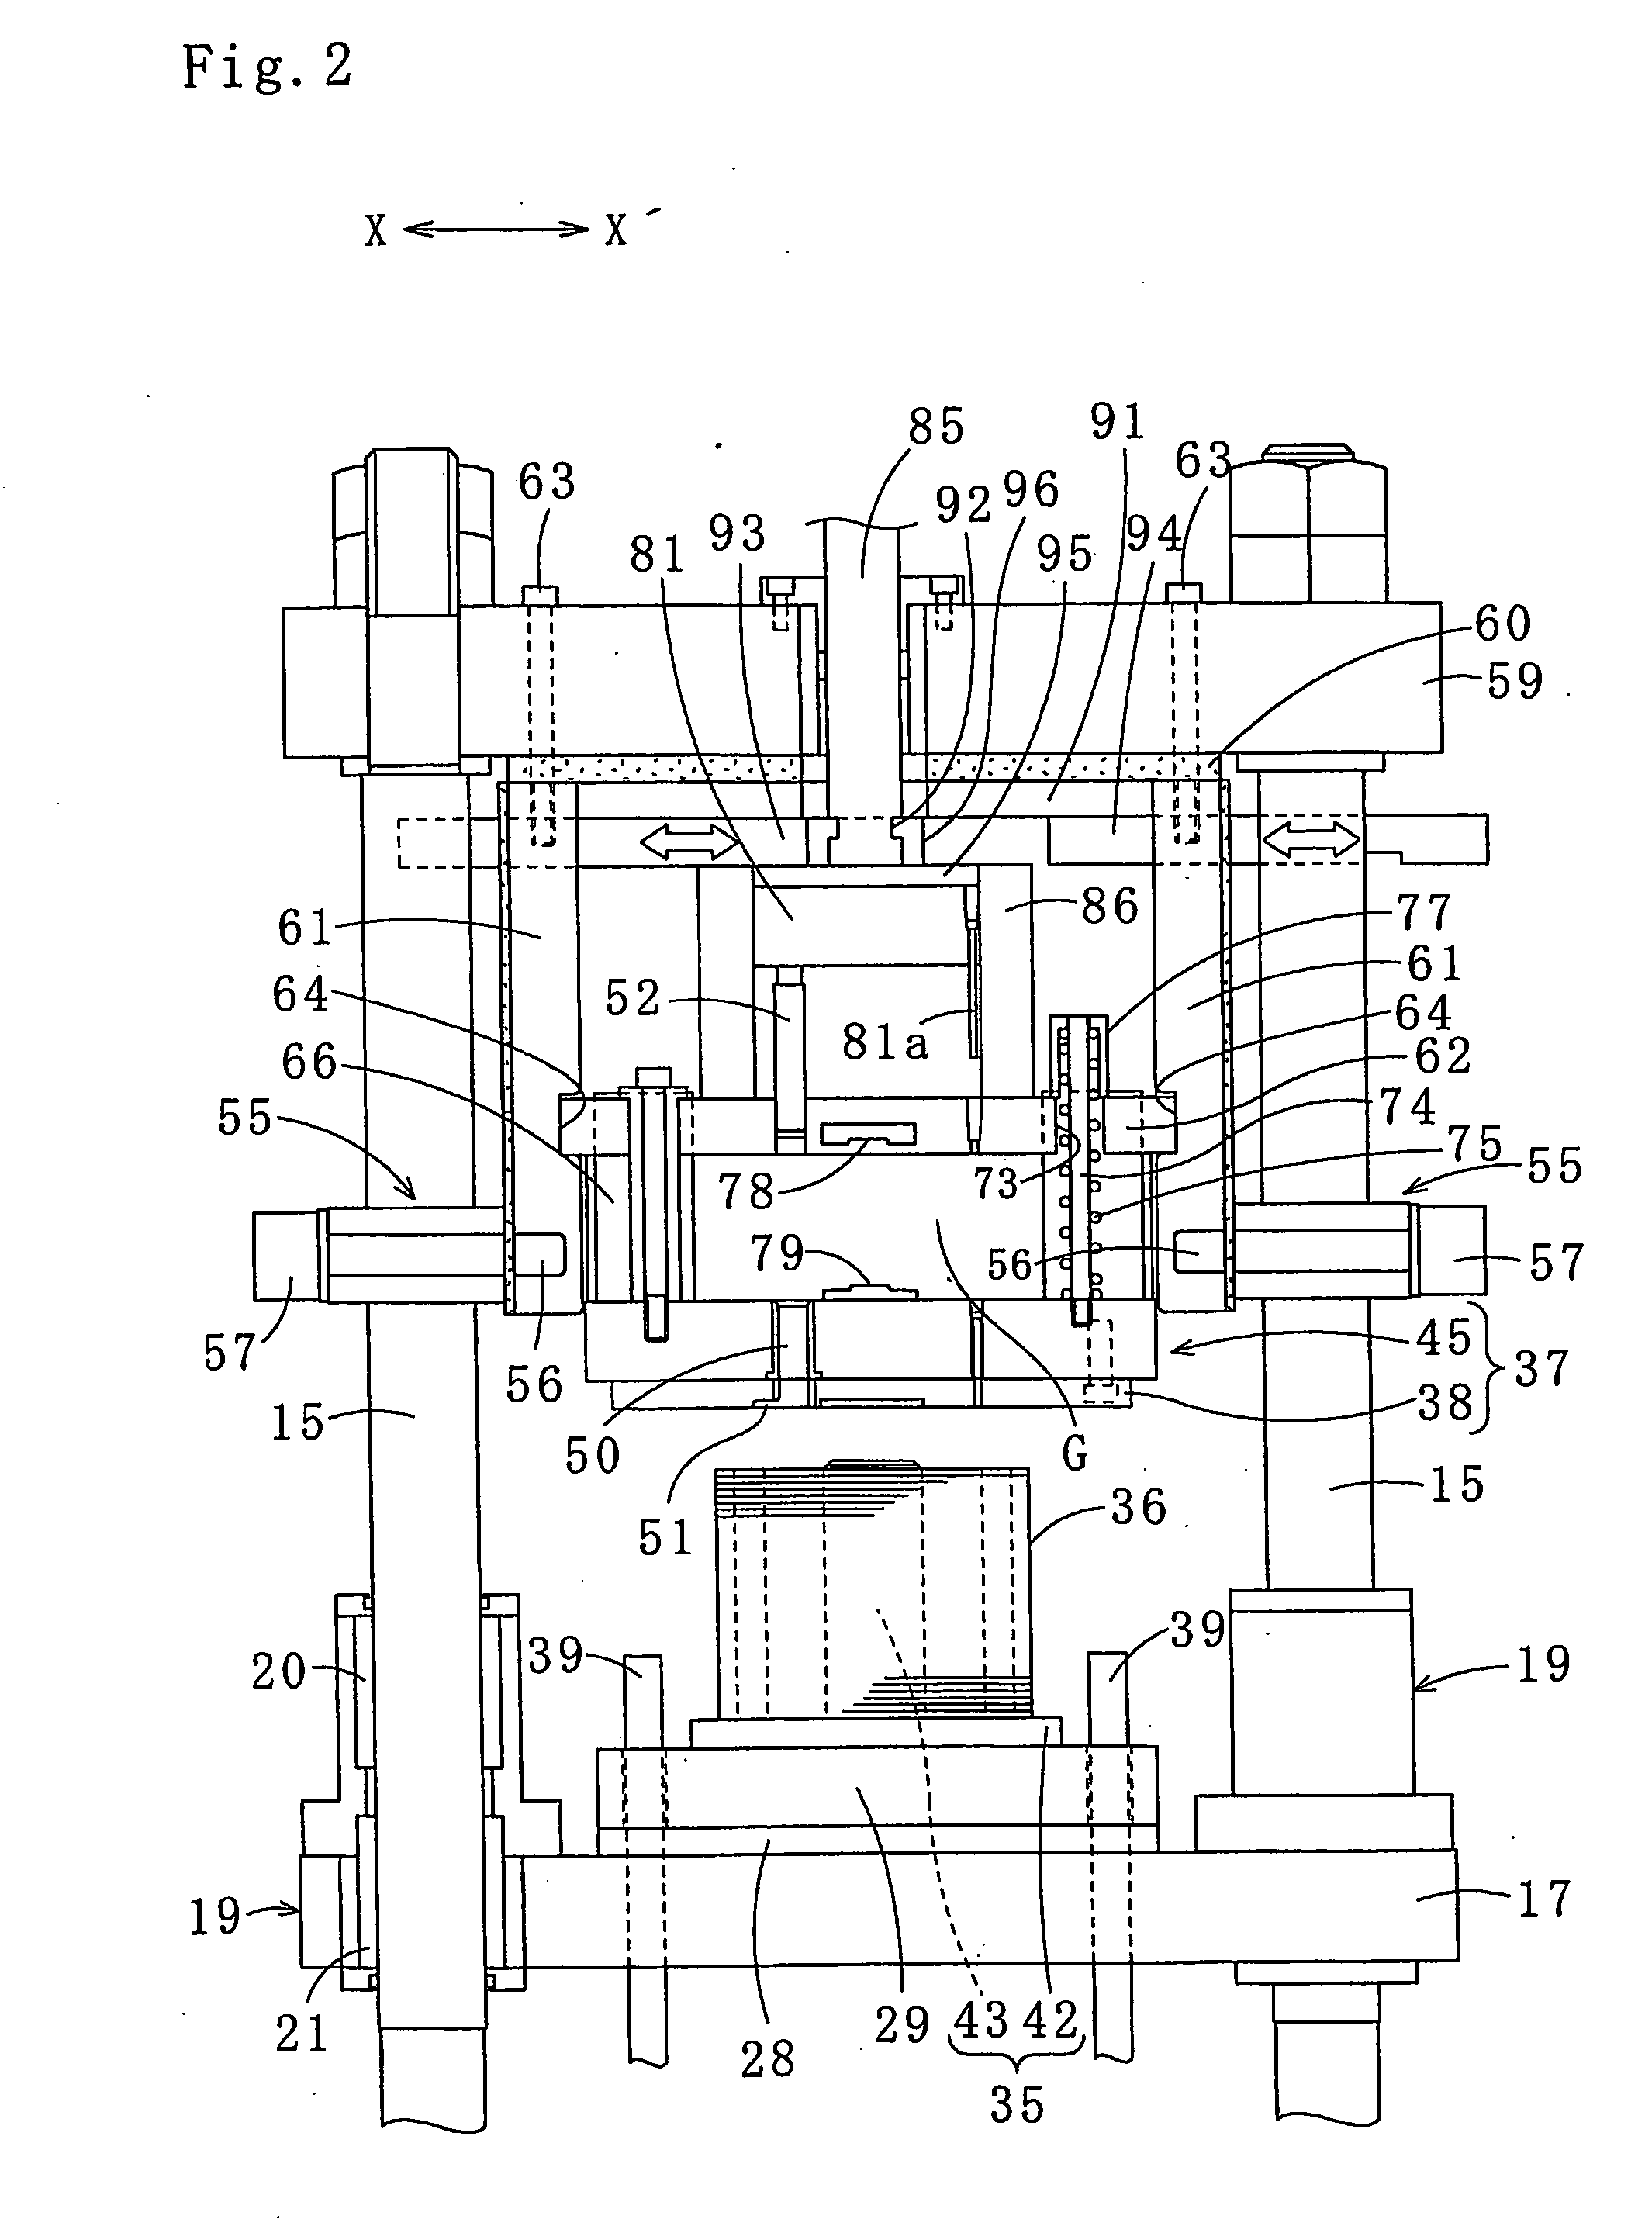 Method of resin sealing permanent magnets in laminated rotor core